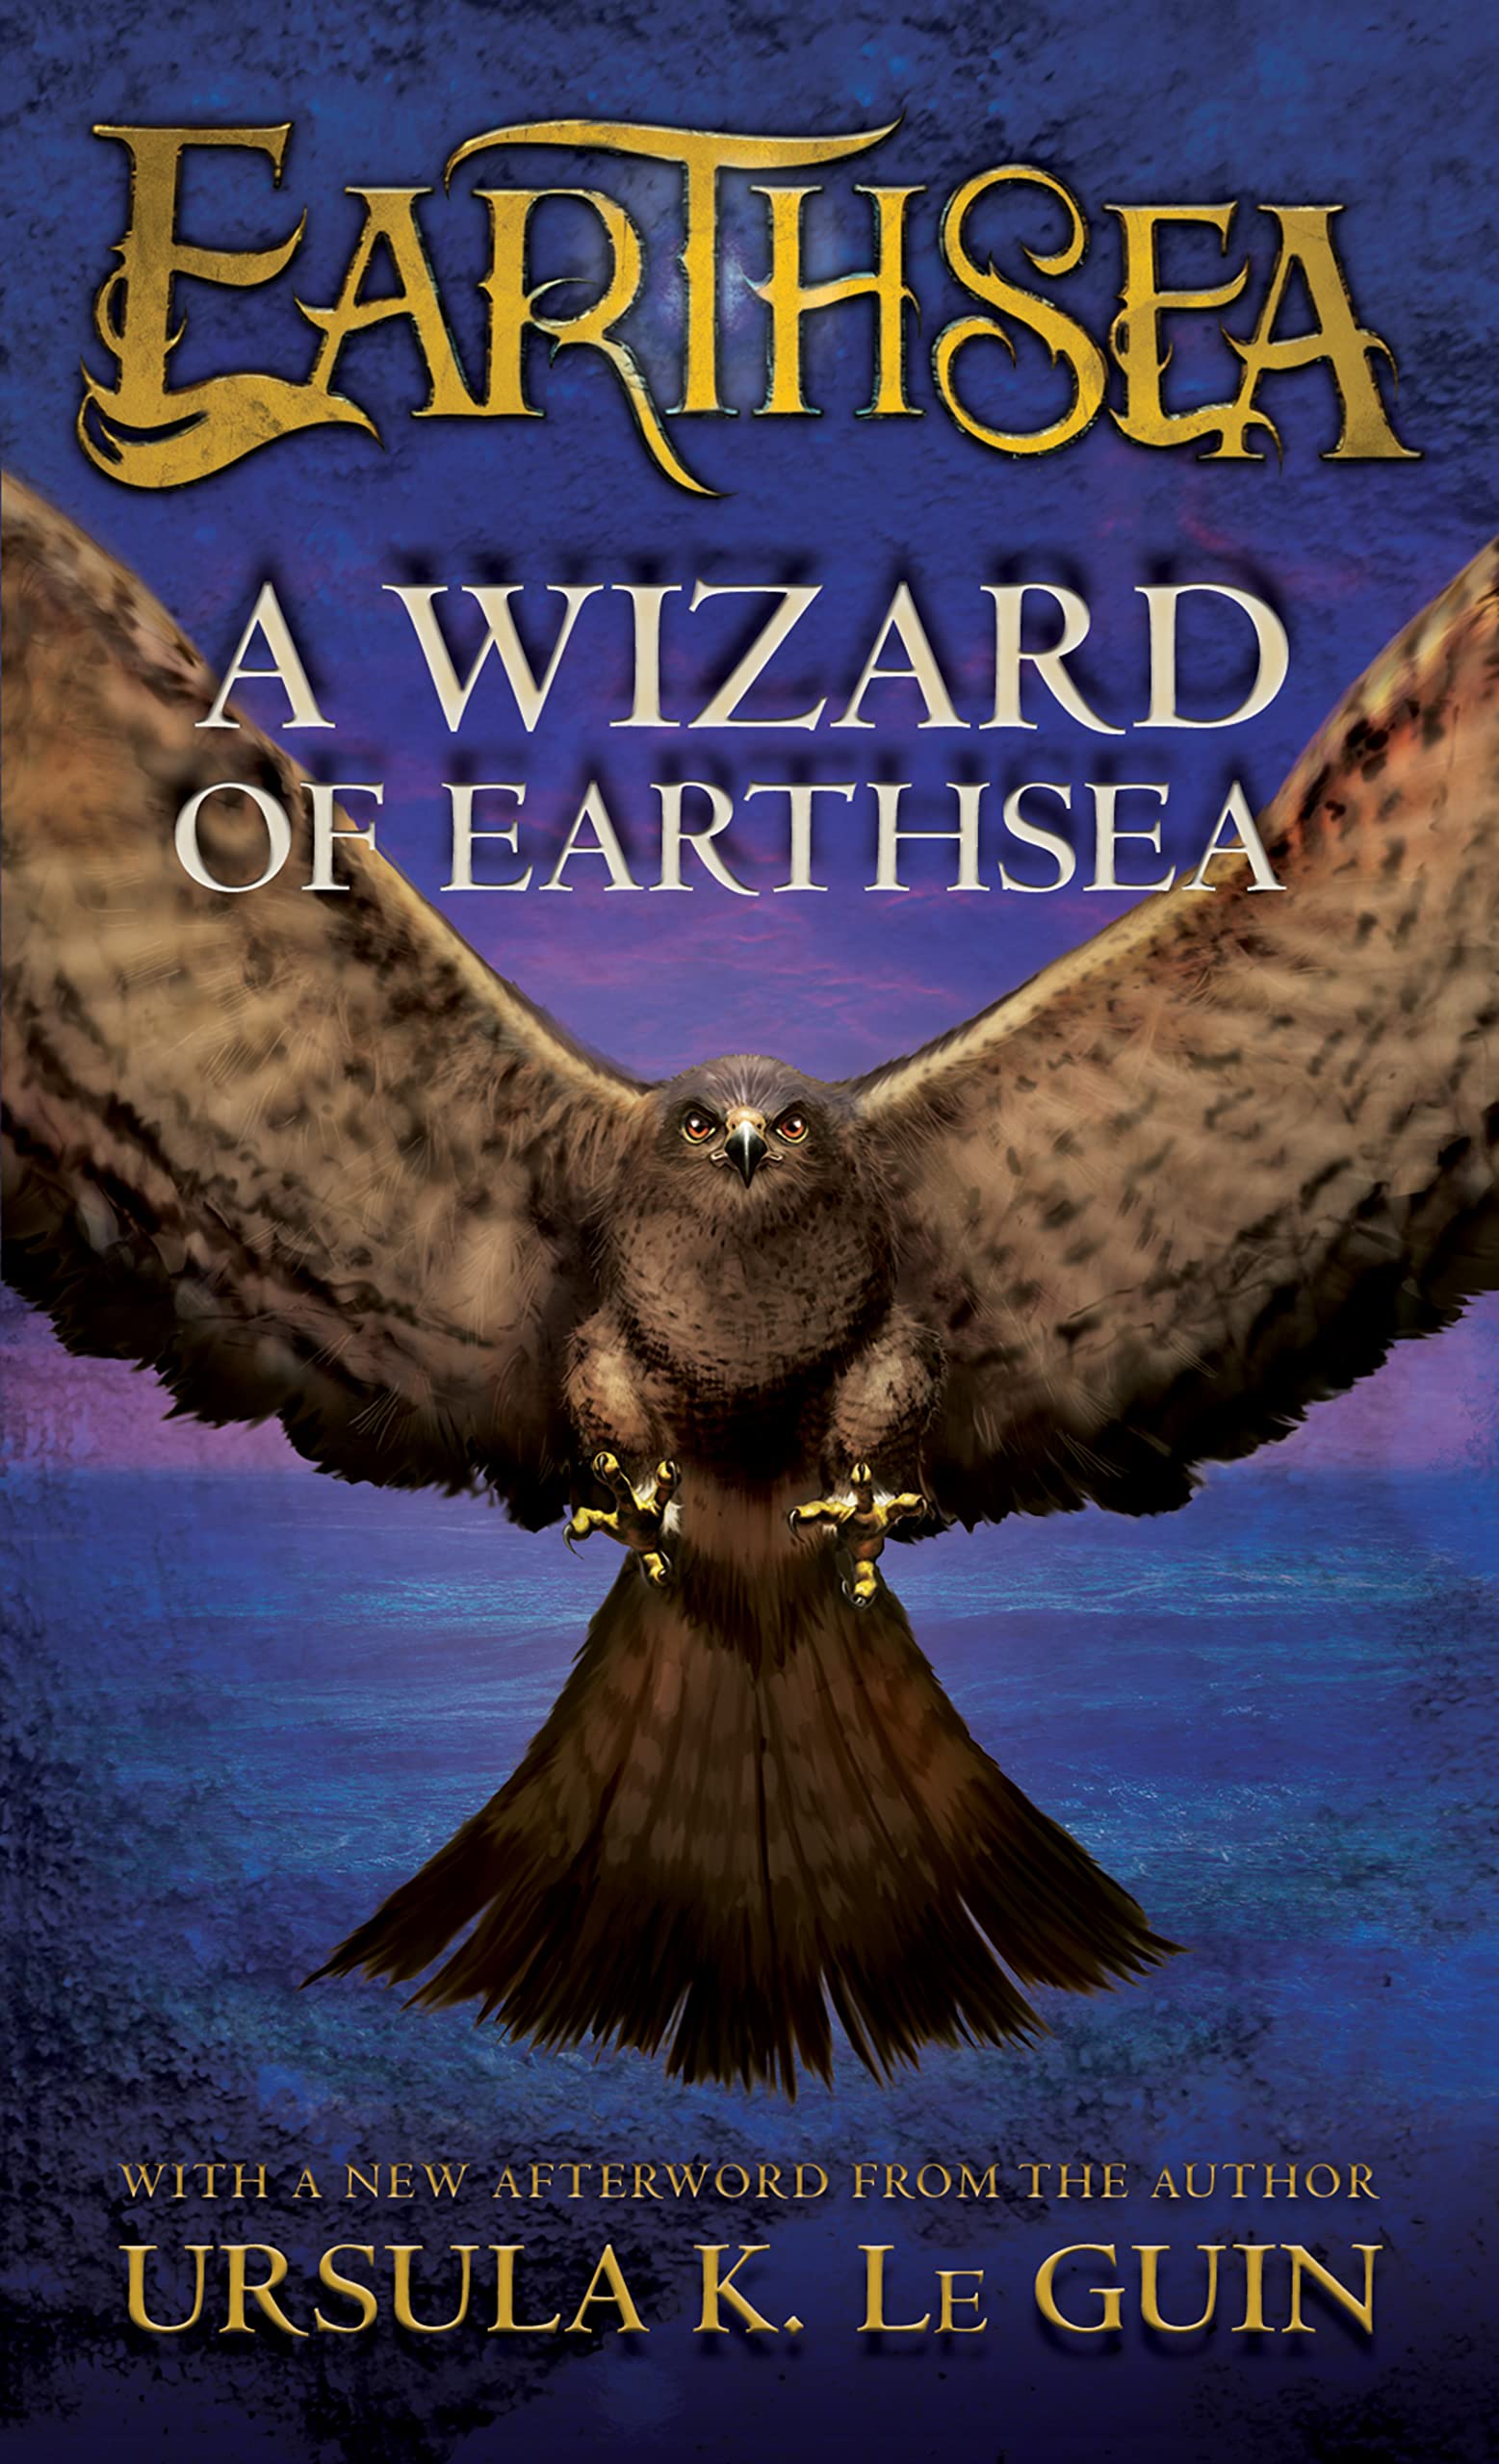 Book Review: Does Ged Overcome His Pride? – A Wizard of Earthseed by Ursula K. Le Guin